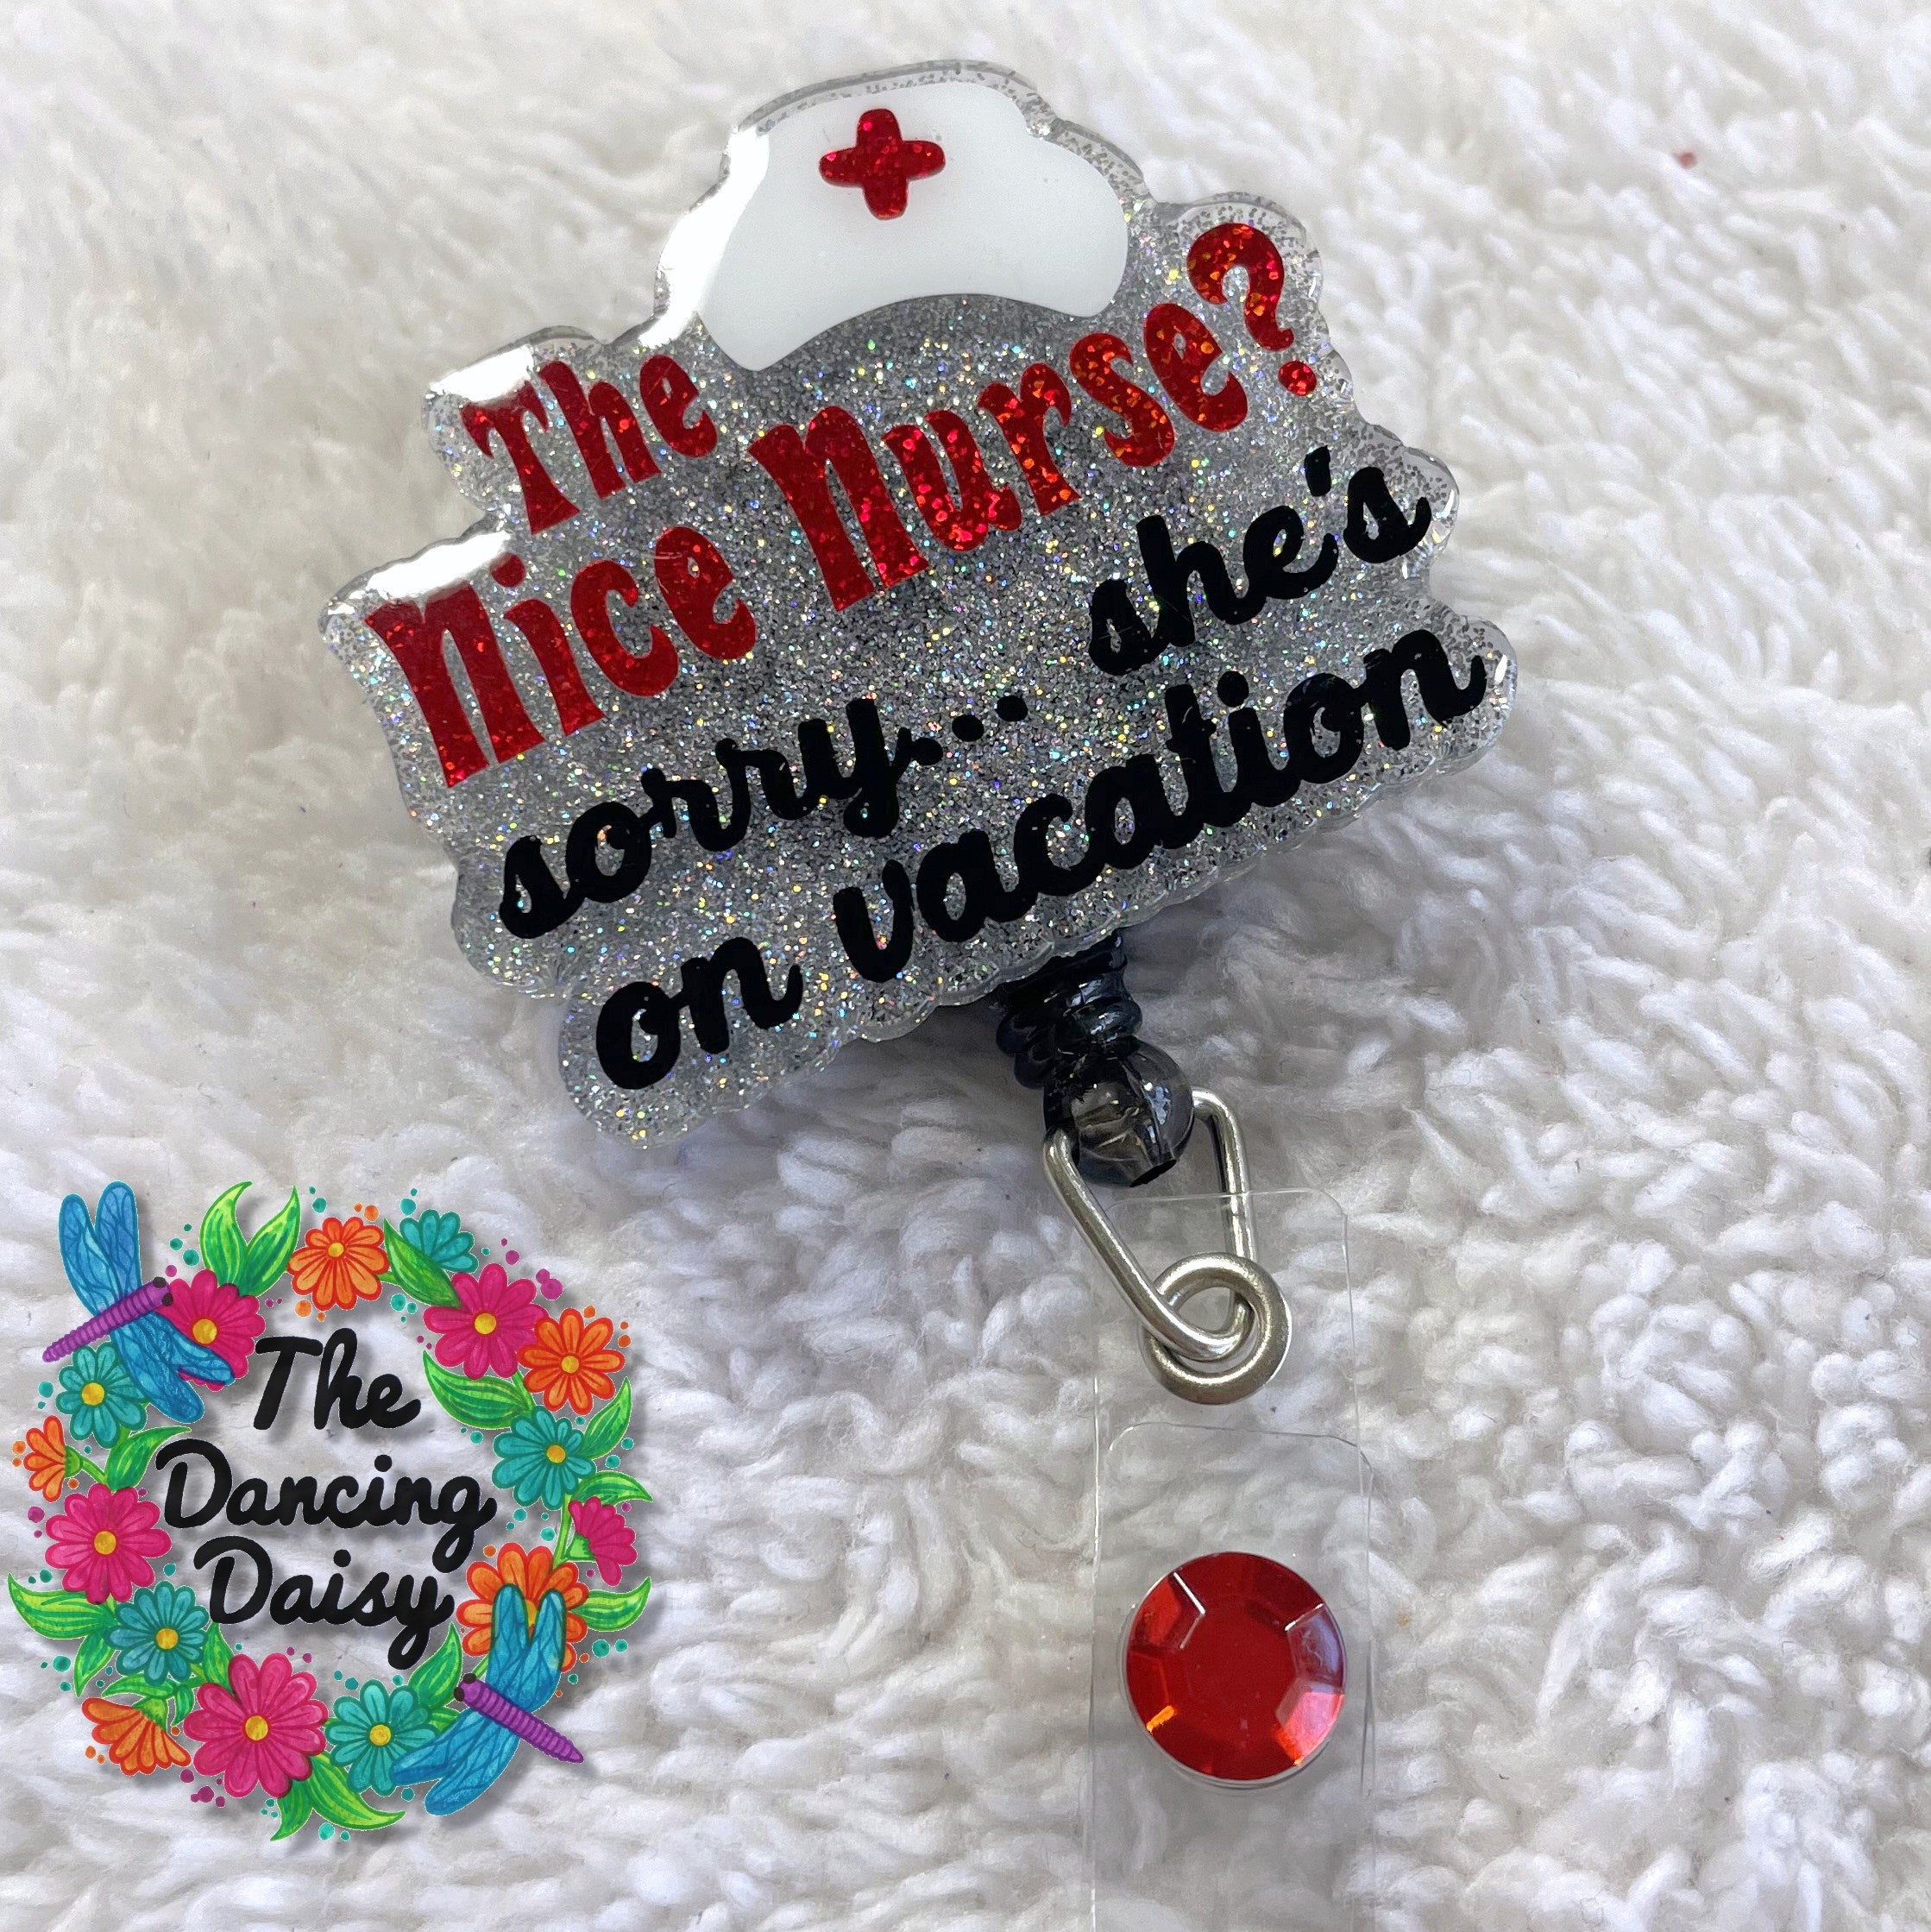 Blessed Nurse - Acrylic Badge Reel Blank and Matching Sticker